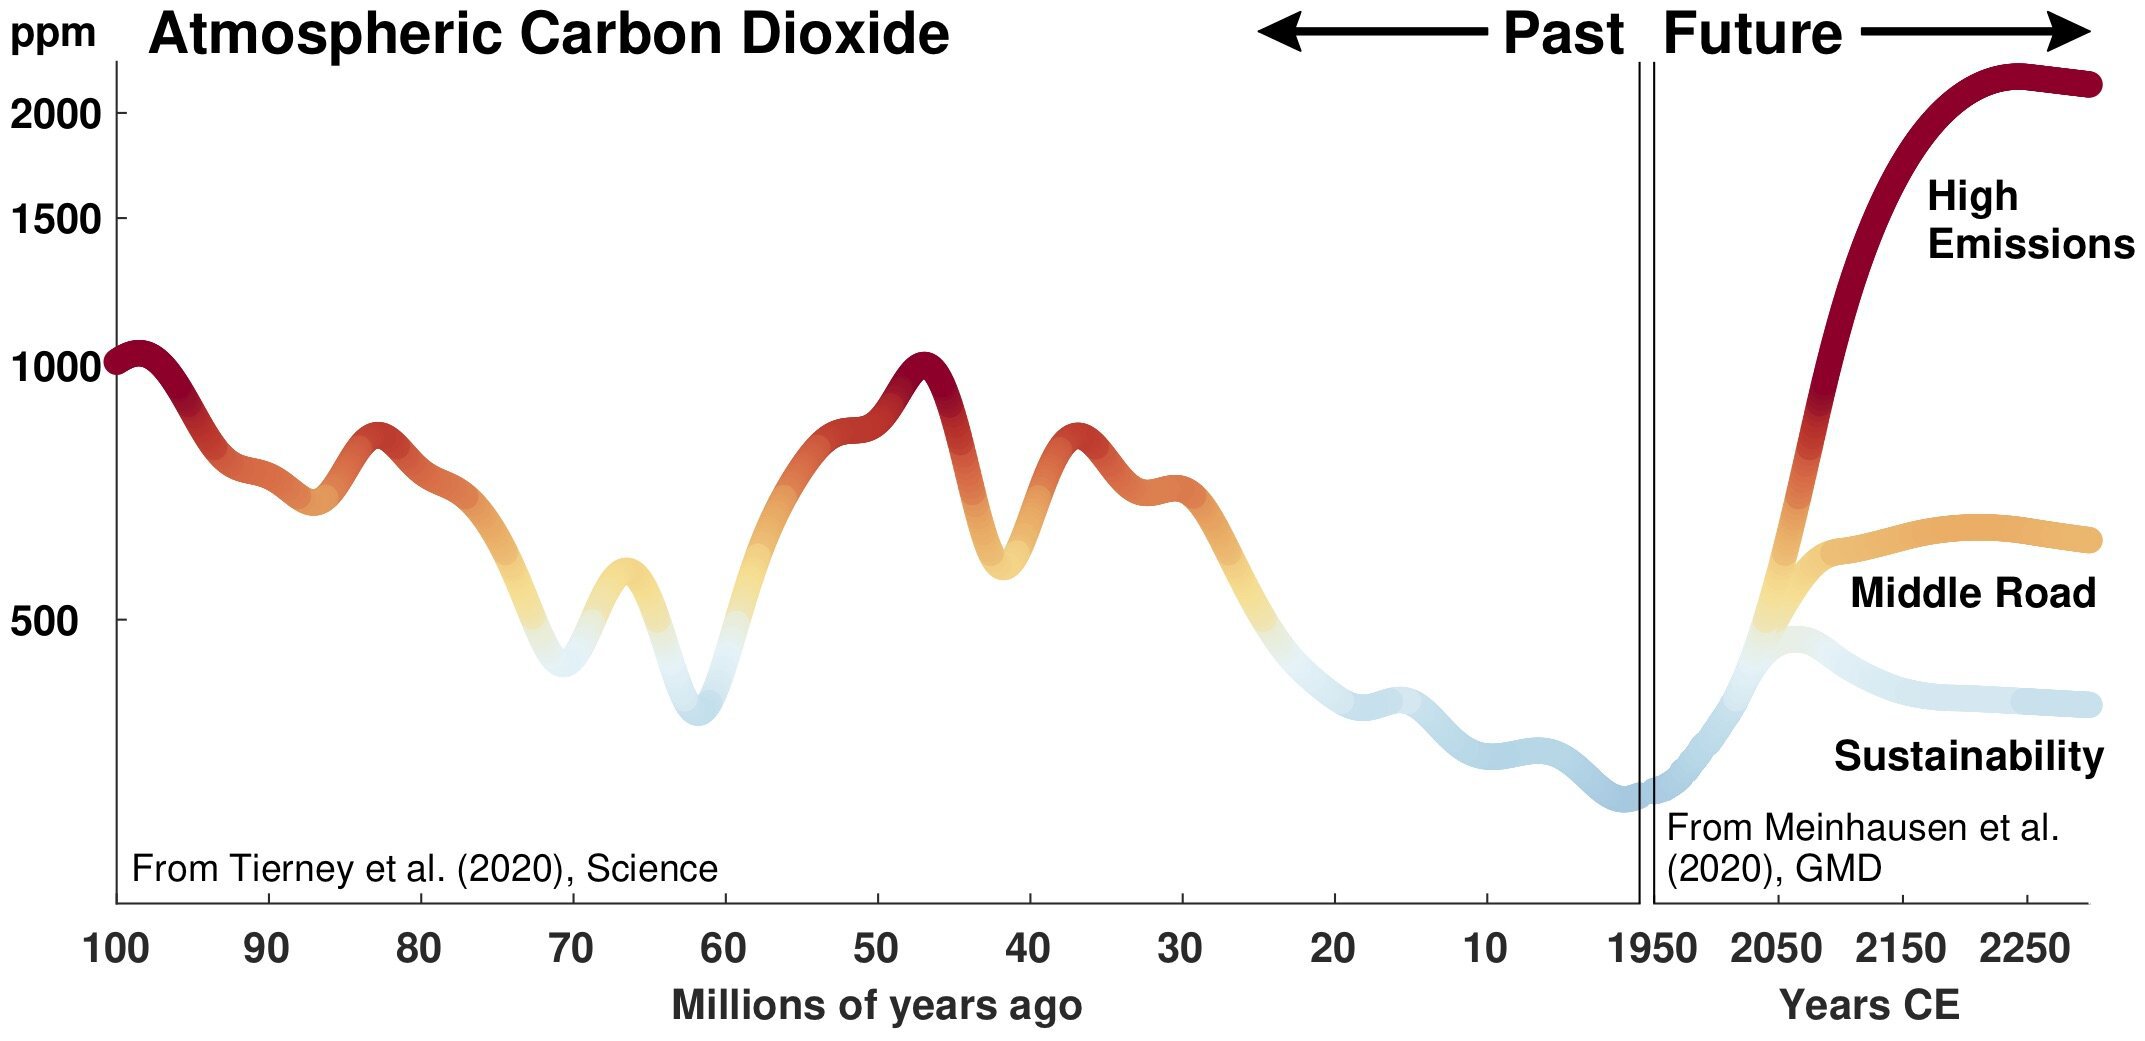 graph showing past and future carbon dioxide concentrations